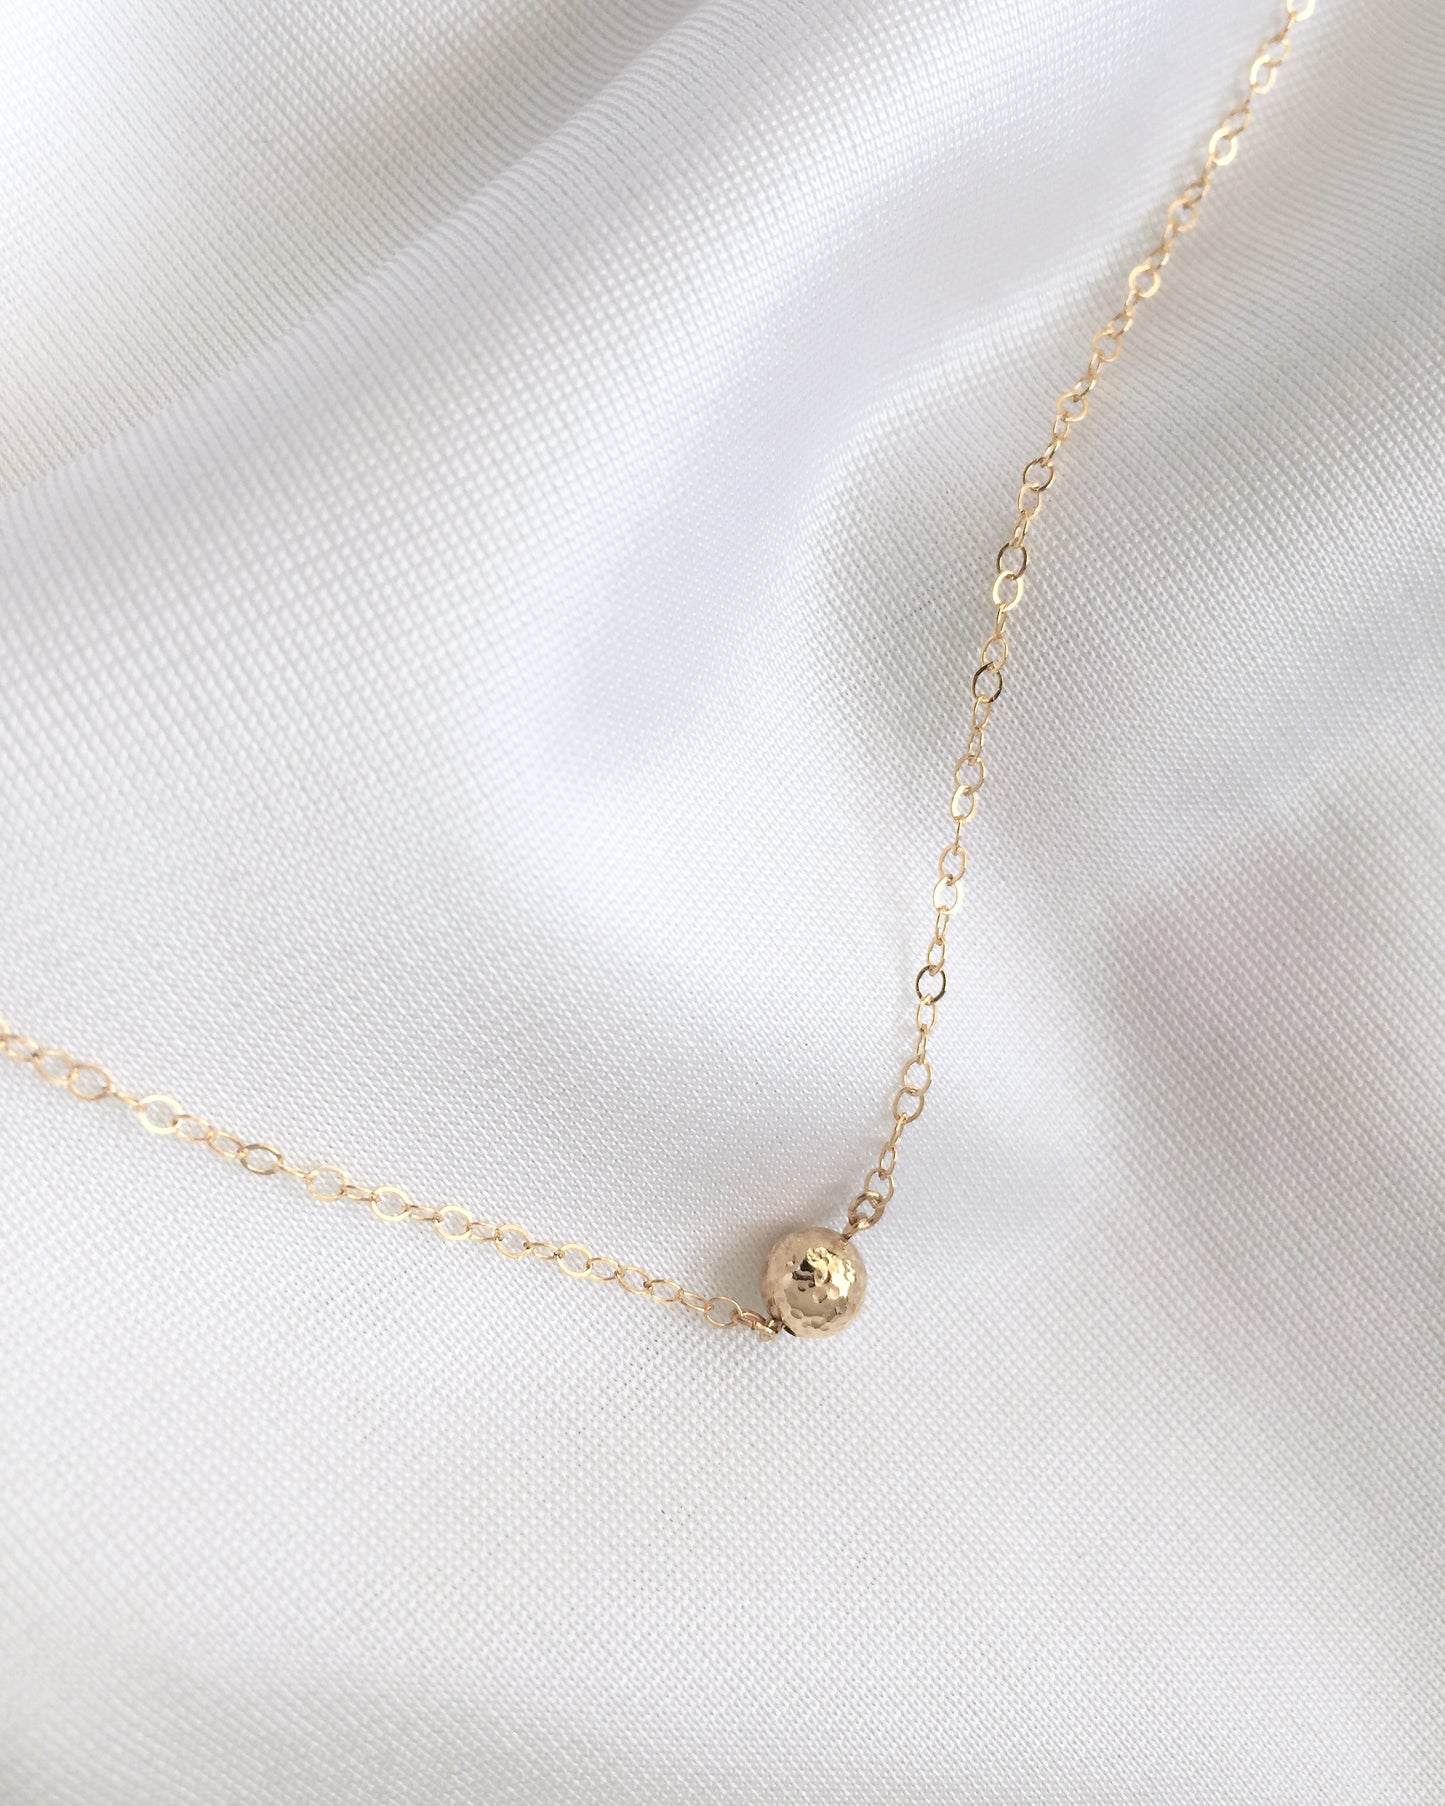 Delicate Gold Ball Necklace | Small Dainty Necklace | Delicate Short Chain Layering Necklace | IB Jewelry